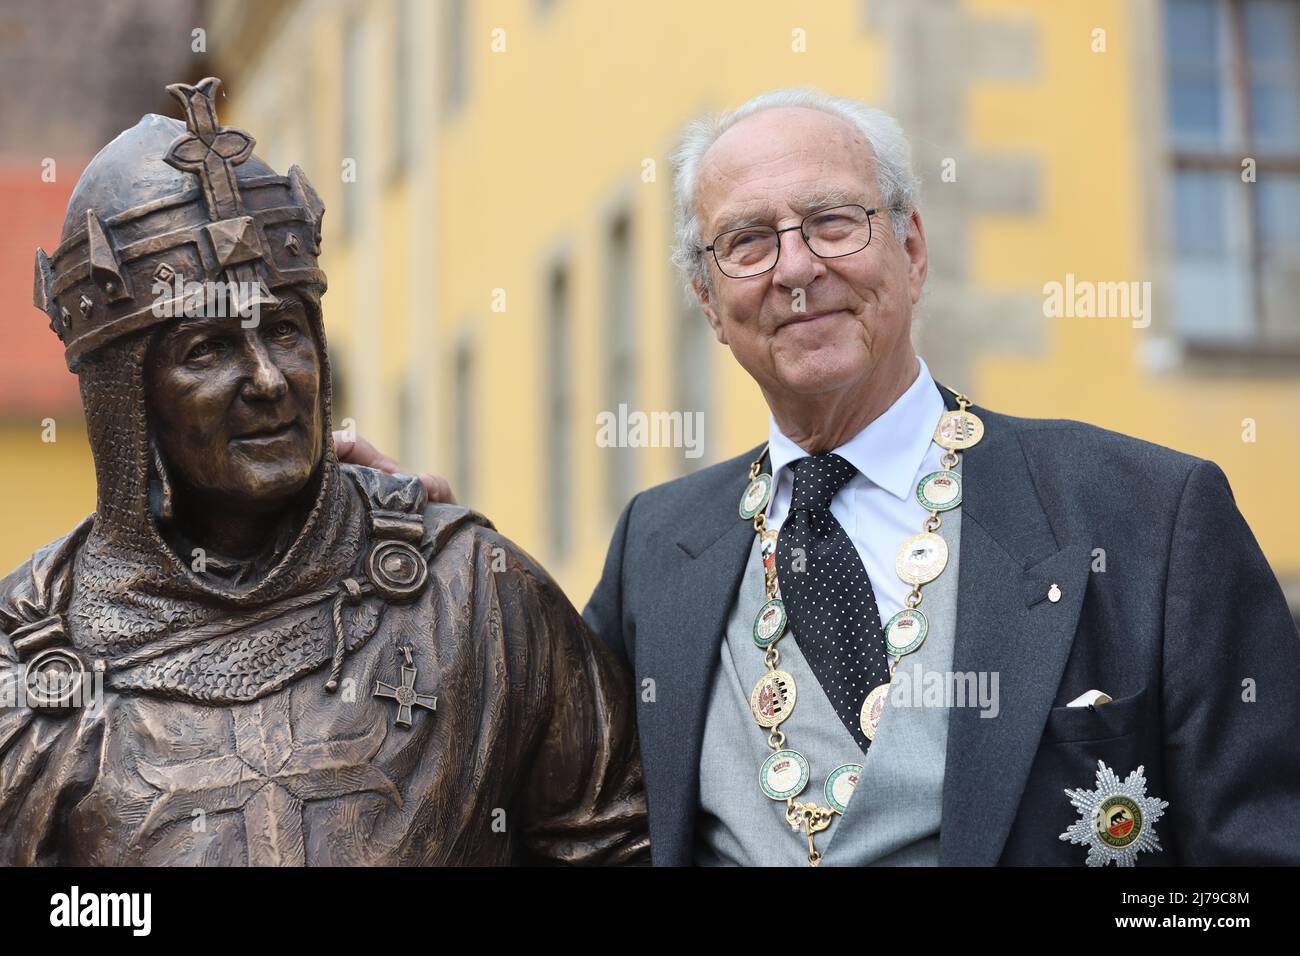 07 May 2022, Saxony-Anhalt, Ballenstedt: Eduard Prince of Anhalt stands at the newly designed monument to Albrecht the Bear. Eduard von Anhalt celebrates his 80th birthday in Ballenstedt. At the same time the investiture took place. Within the scope of the Investiture, persons are honored annually for special achievements by the Askan House Order "Albrecht the Bear". The investiture takes place in the presence of Eduard Prince of Anhalt. Photo: Matthias Bein/dpa/ZB Stock Photo